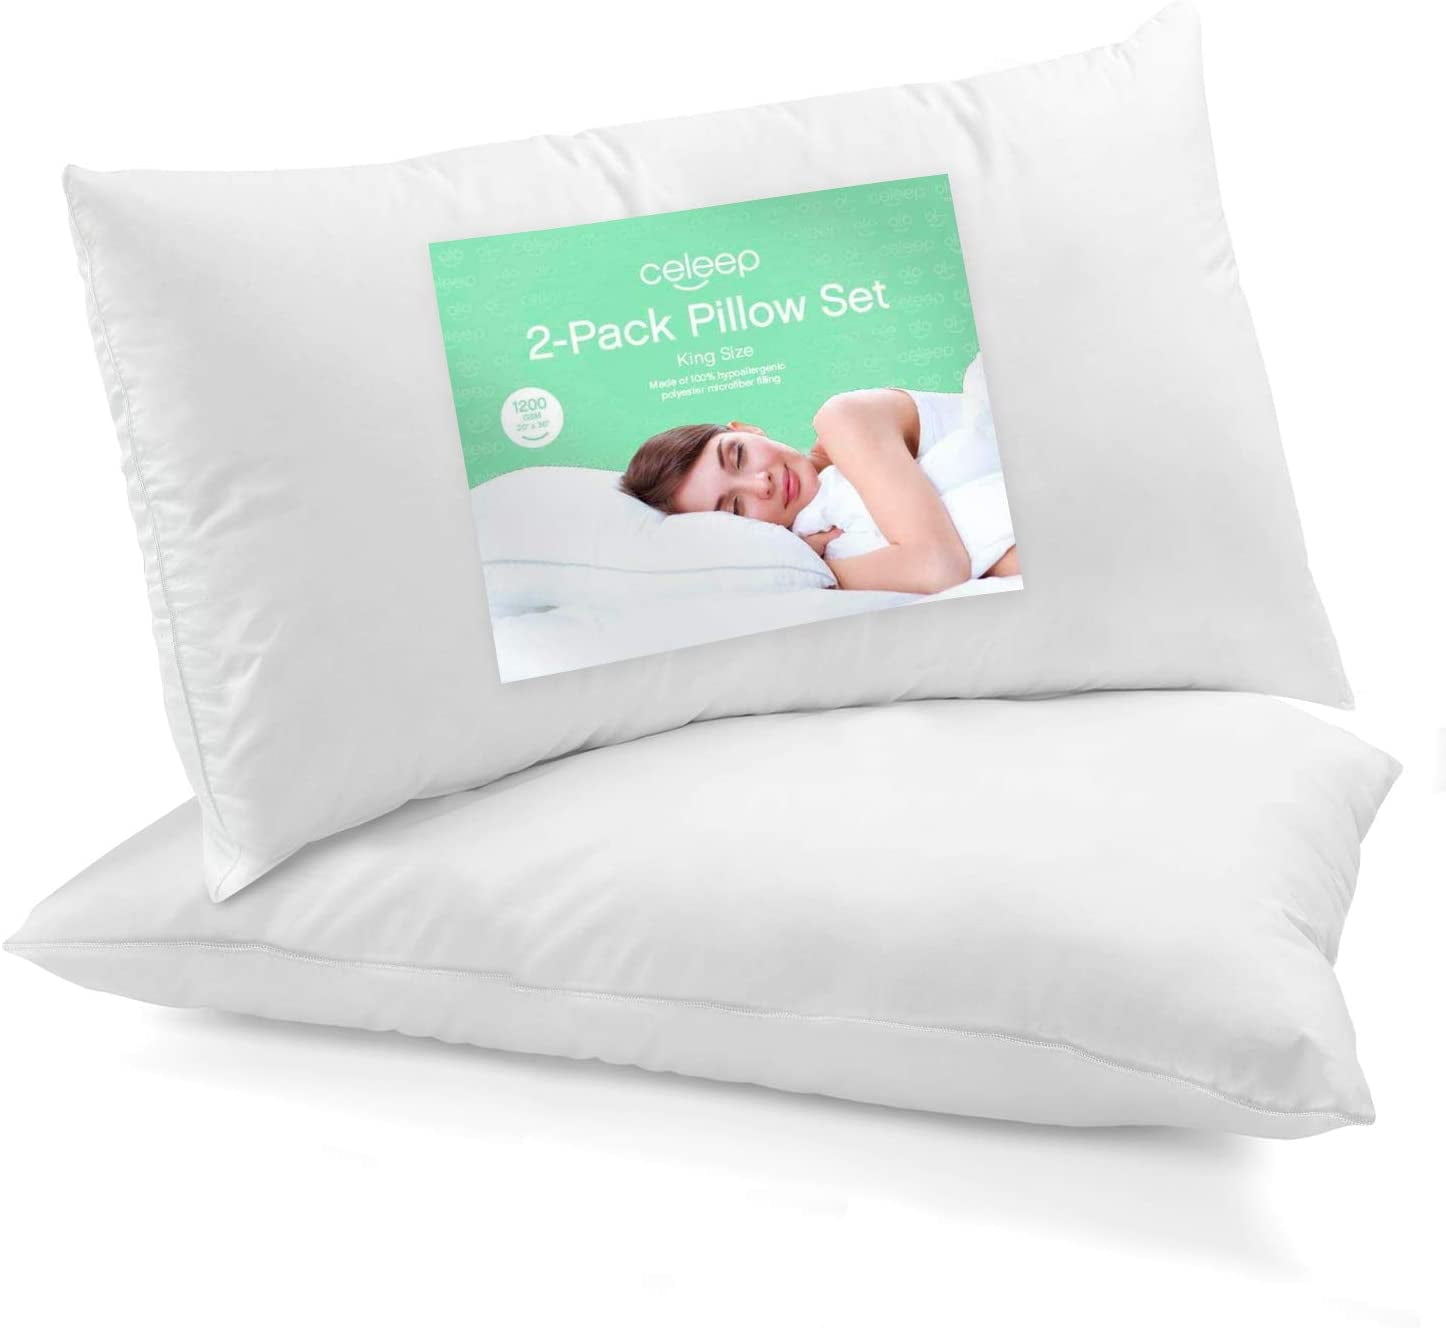 2 Pack Hotel Collection Super Soft Standard Size Pillow for Sleeping 20x26 Inches Basic Beyond Down Alternative Bed Pillow 